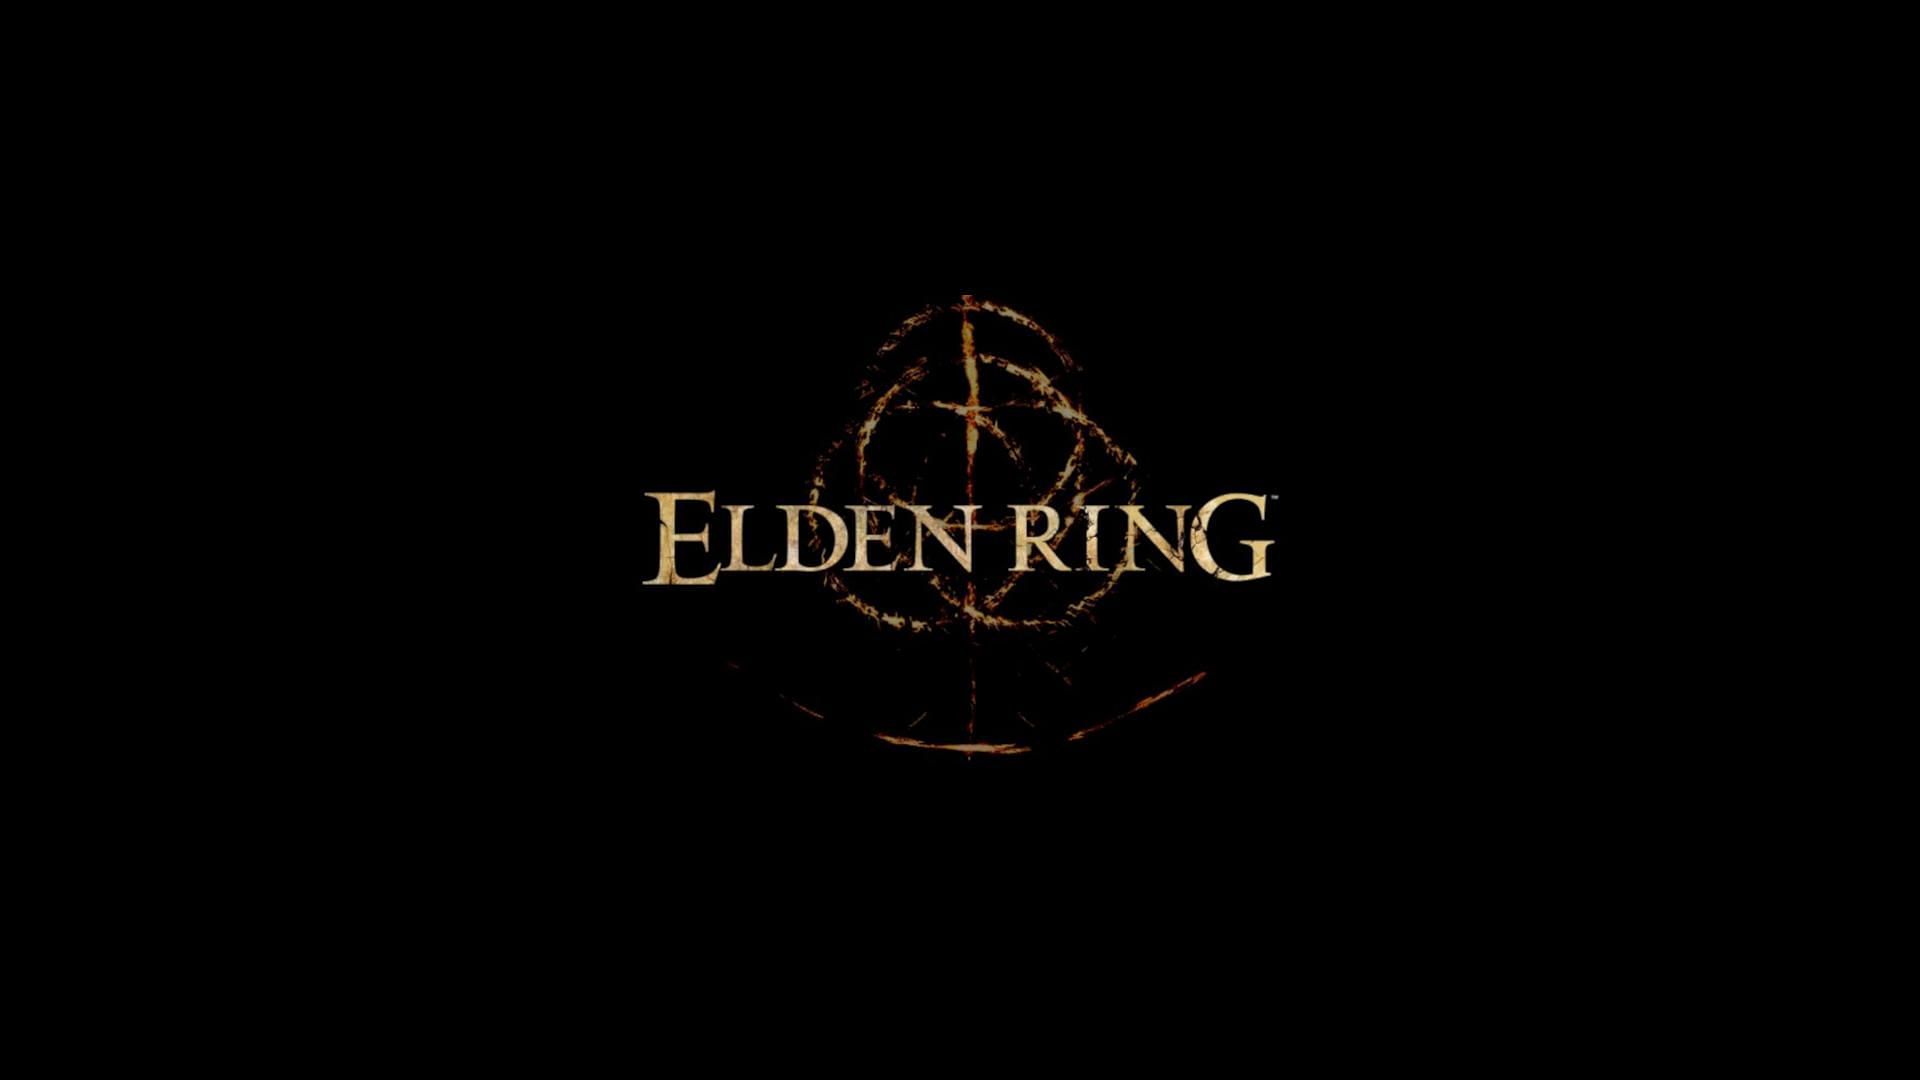 One of the cover images of Elden Ring (Image via FromSoftware Inc.)